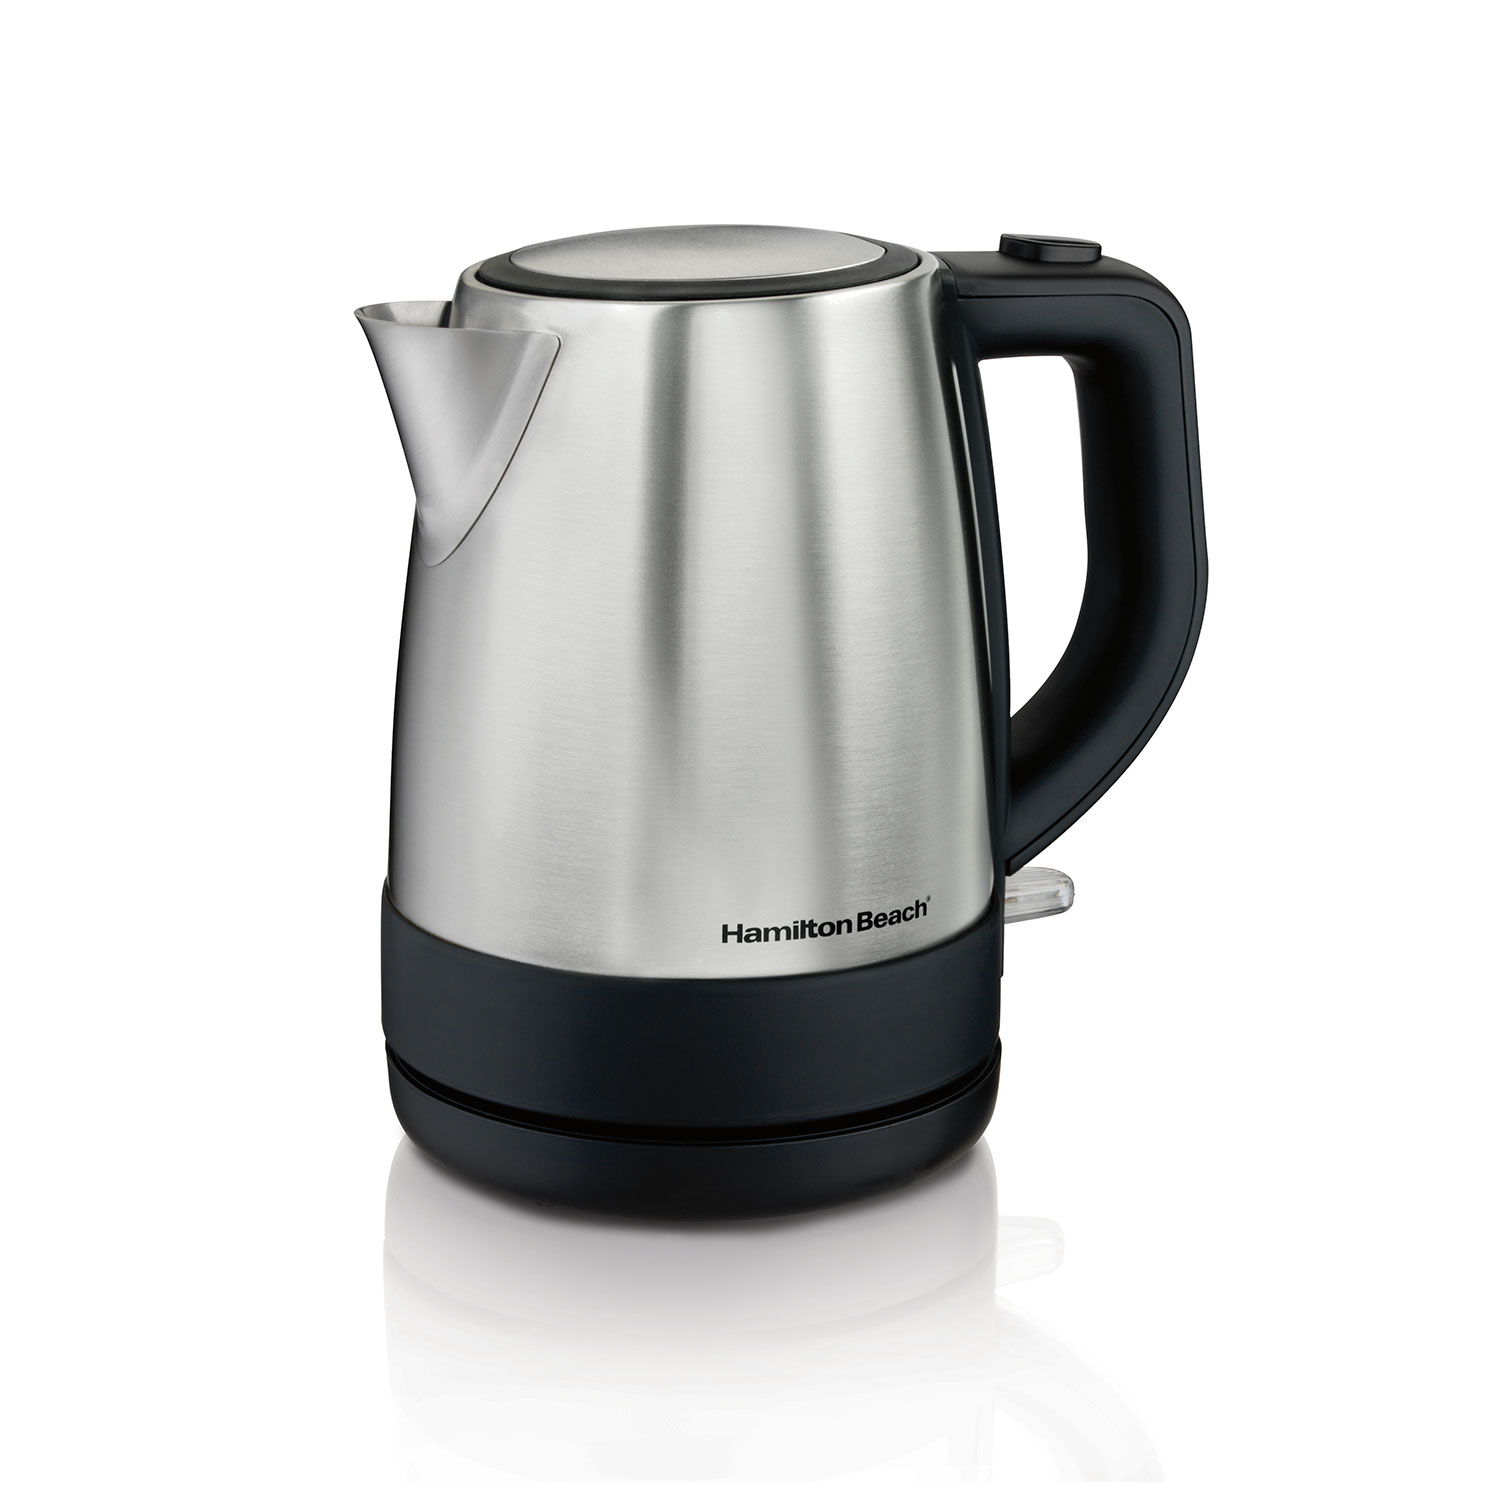 Recertified 1 Liter Stainless Steel Electric Kettle (R40978)